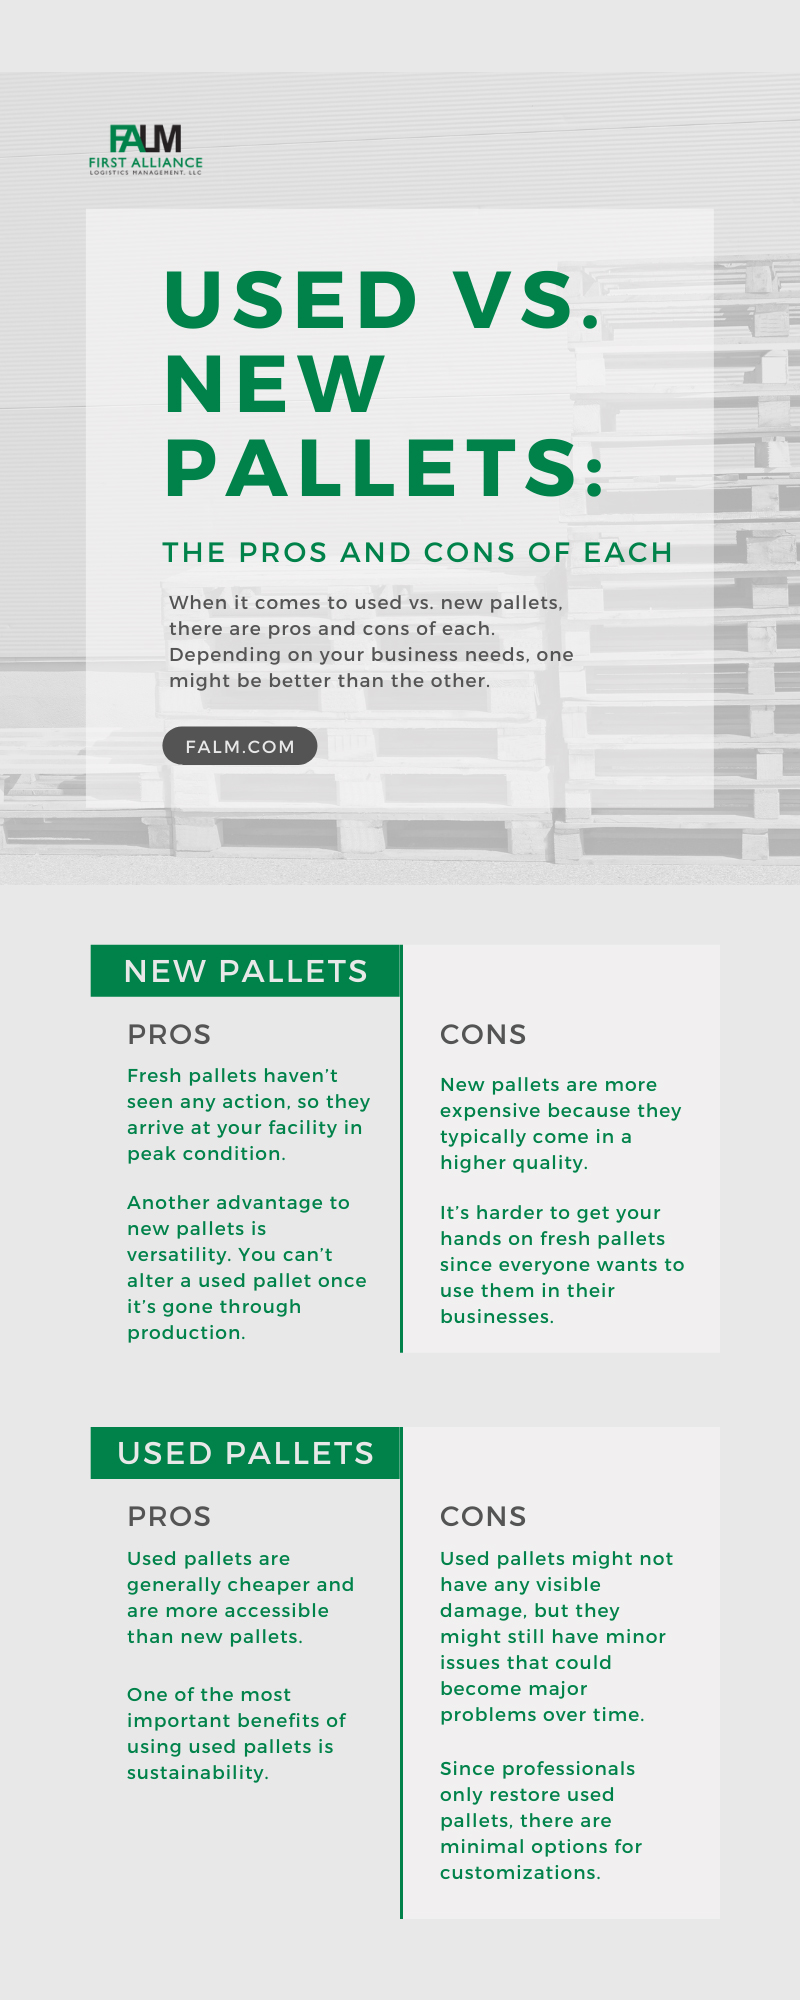 Used vs. New Pallets: The Pros and Cons of Each